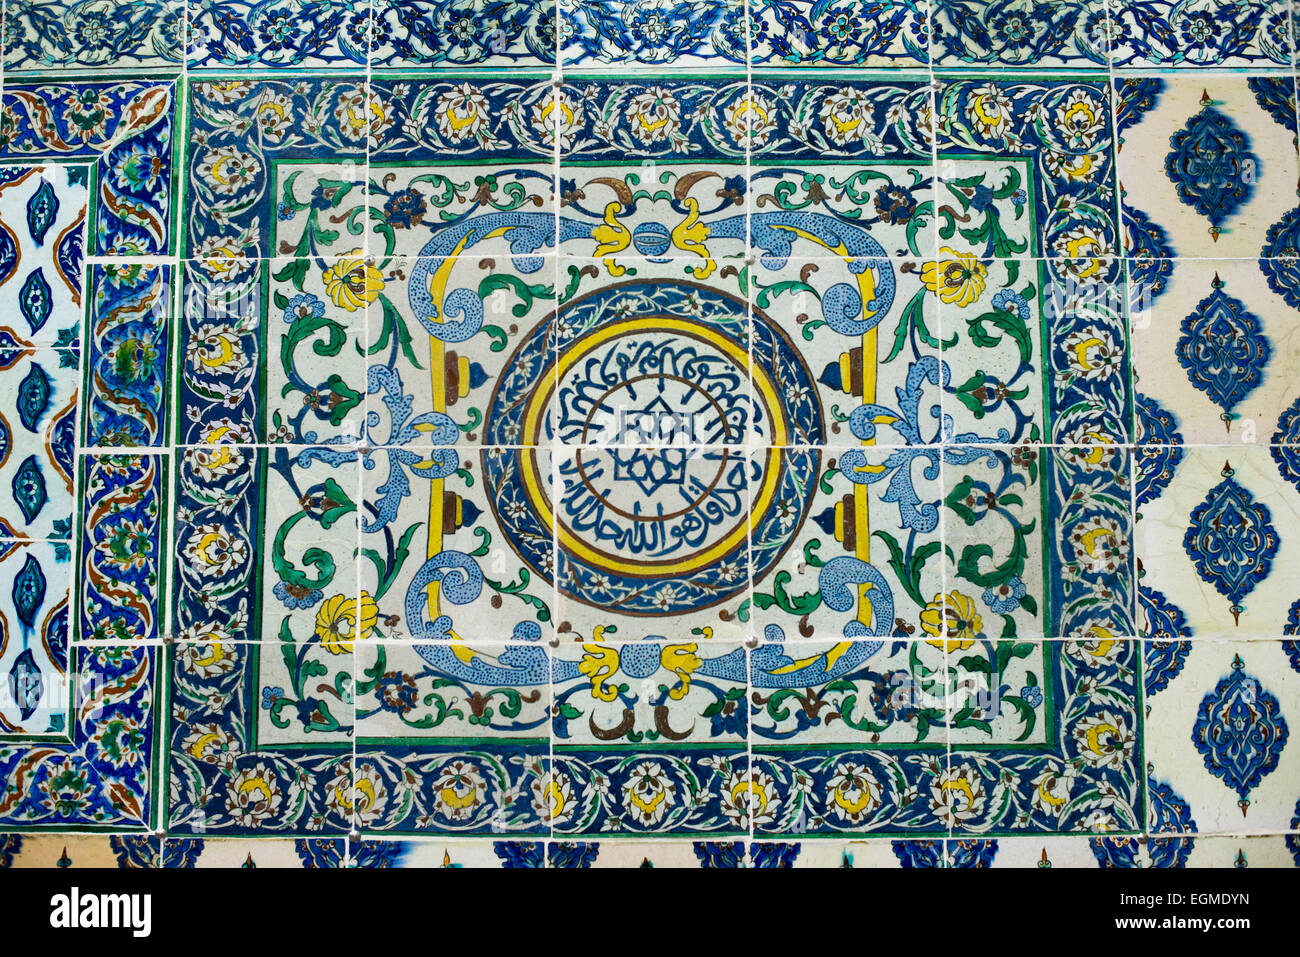 ISTANBUL, Turkey (Türkiye) — Ornate tiles decorating the walls of the Harem Mosque at Topkapi Palace. The Harem Mosque (Harem Mescidi) of Topkapi Palace was built in the 17th century as a prayer hall for the sultan's mother, daughters, and first consort, as well as senior women of the harem. The Imperial Harem was the inner sanctum of the Topkapi Palace where the Sultan and his family lived. Standing on a peninsular overlooking the Bosphorus Strait and Golden Horn, Topkapi Palace was the primary residence of the Ottoman sultans for approximately 400 years (1465–1856) of their 624-year reign. Stock Photo